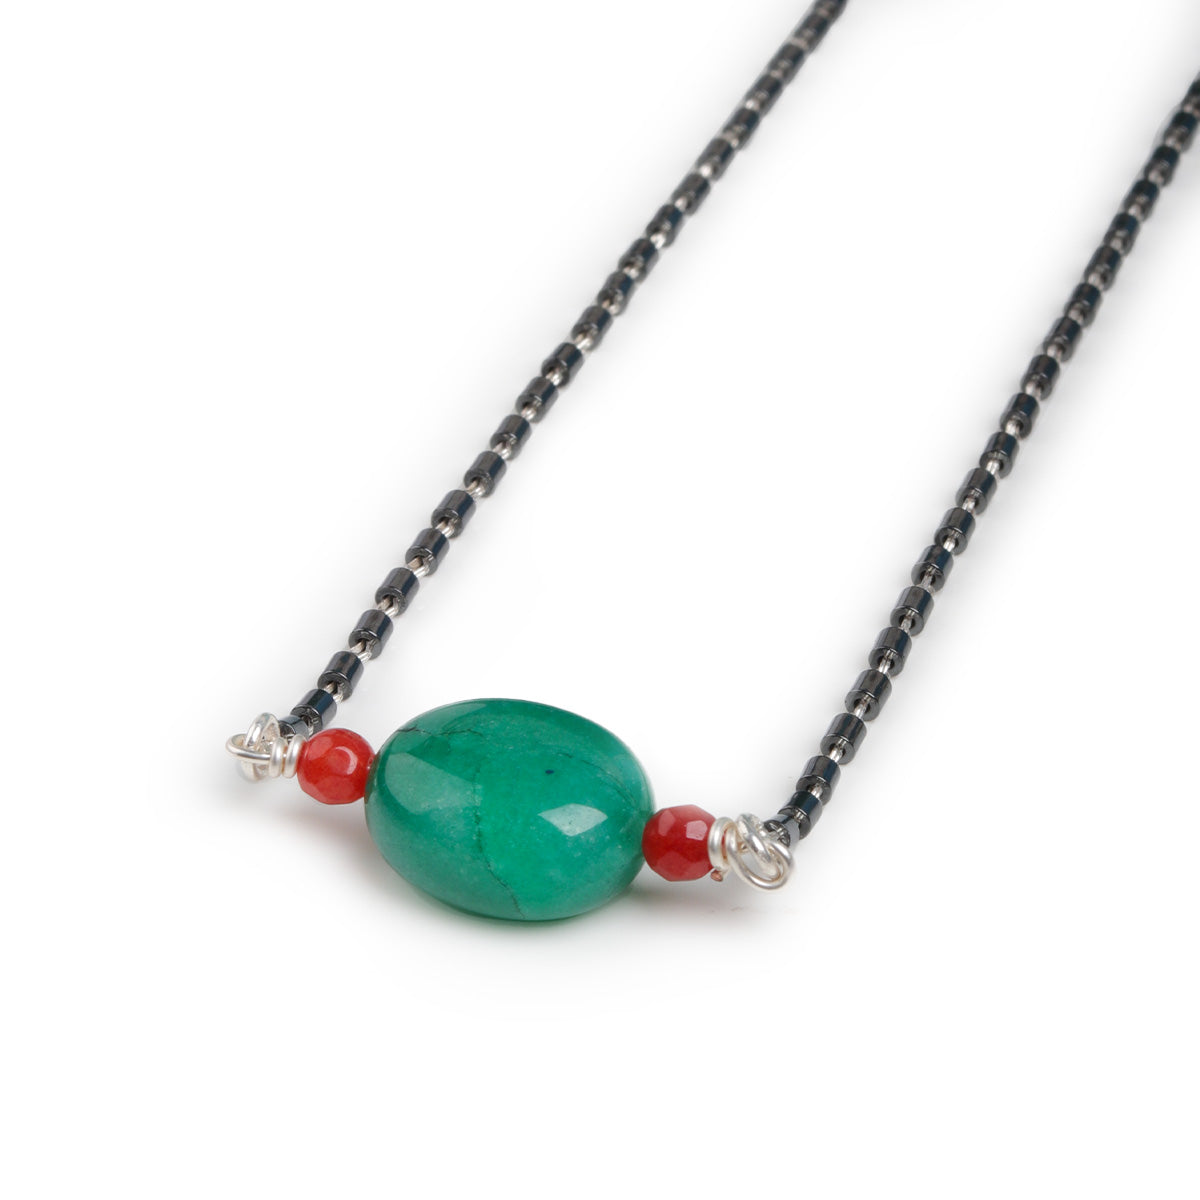 Niti Green Silver Mangalsutra by Moha